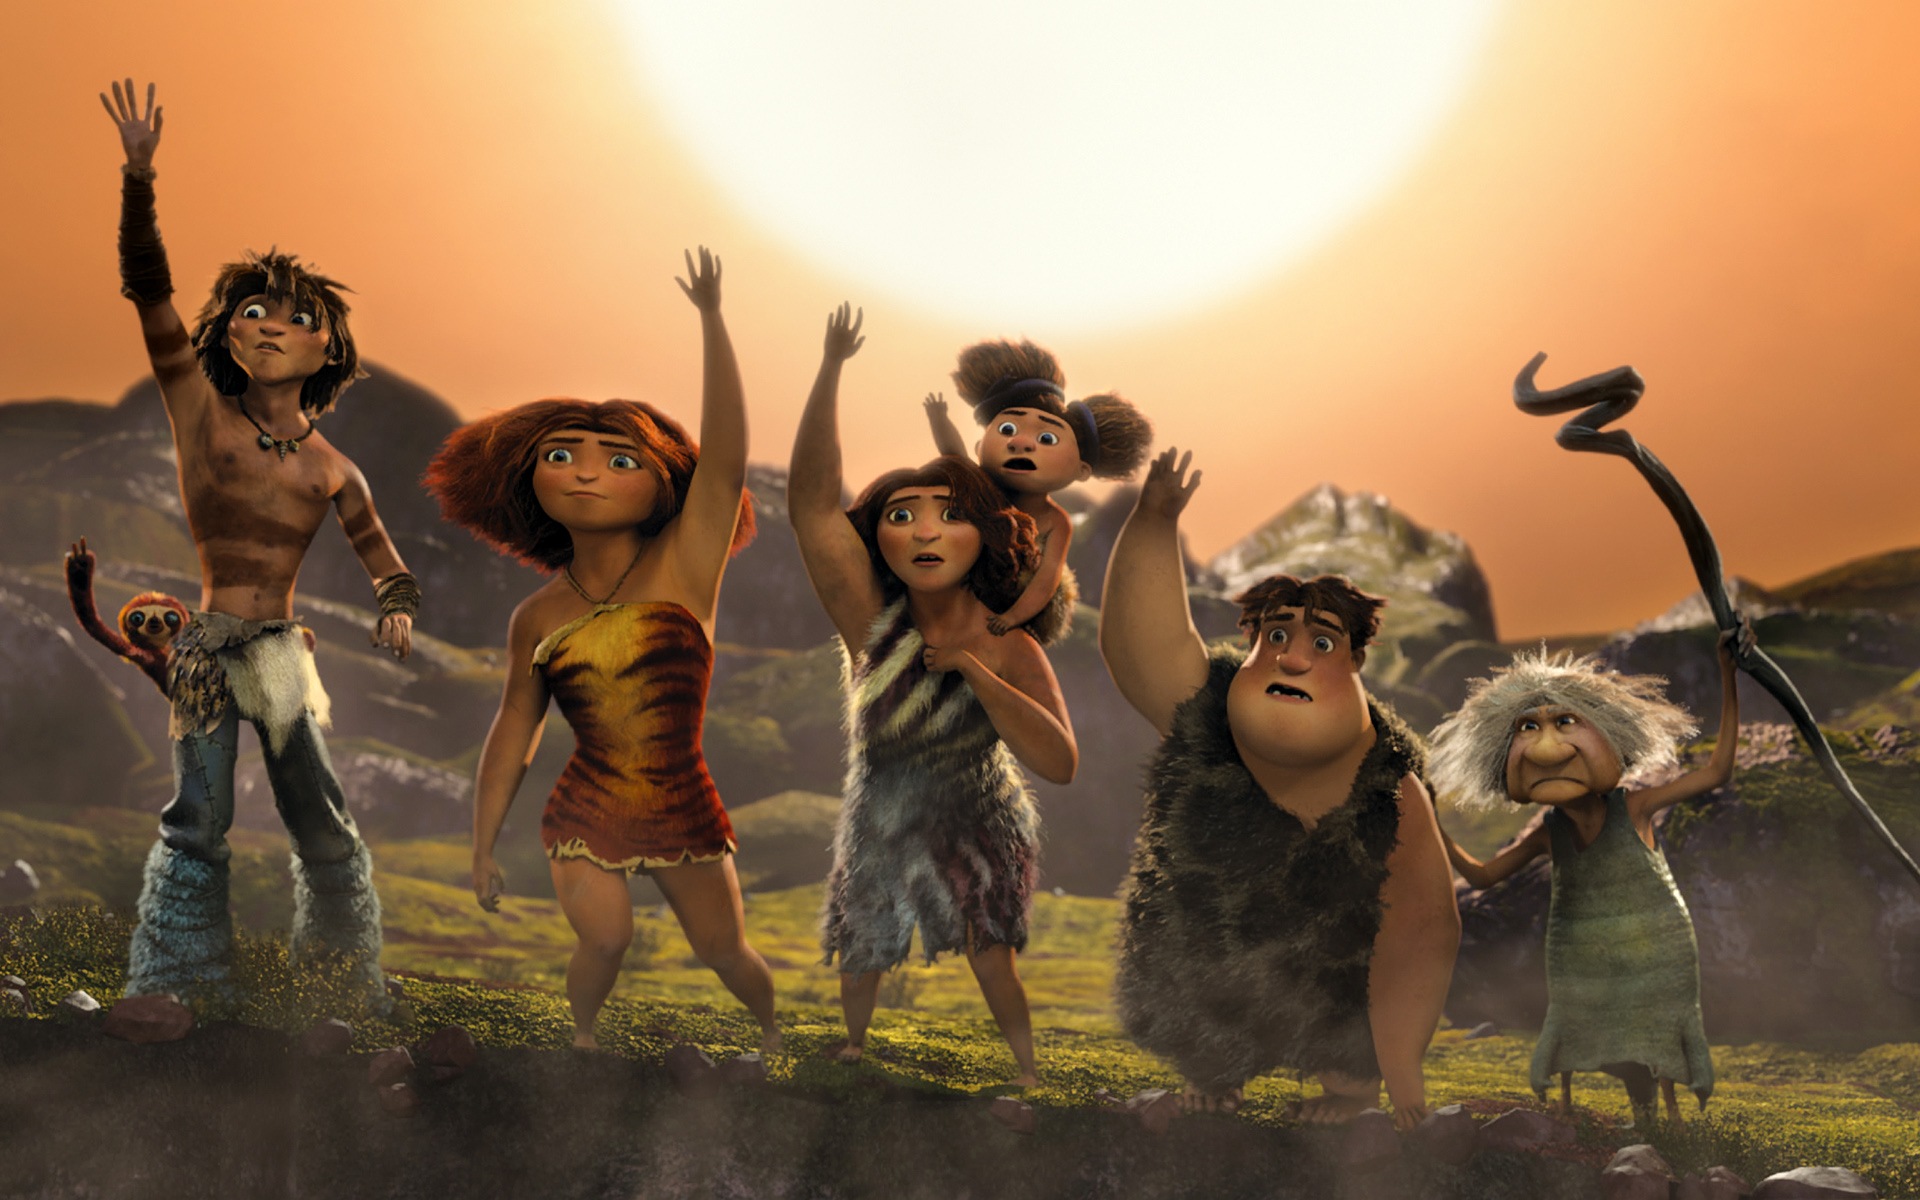 V Croods HD Movie Wallpapers #4 - 1920x1200